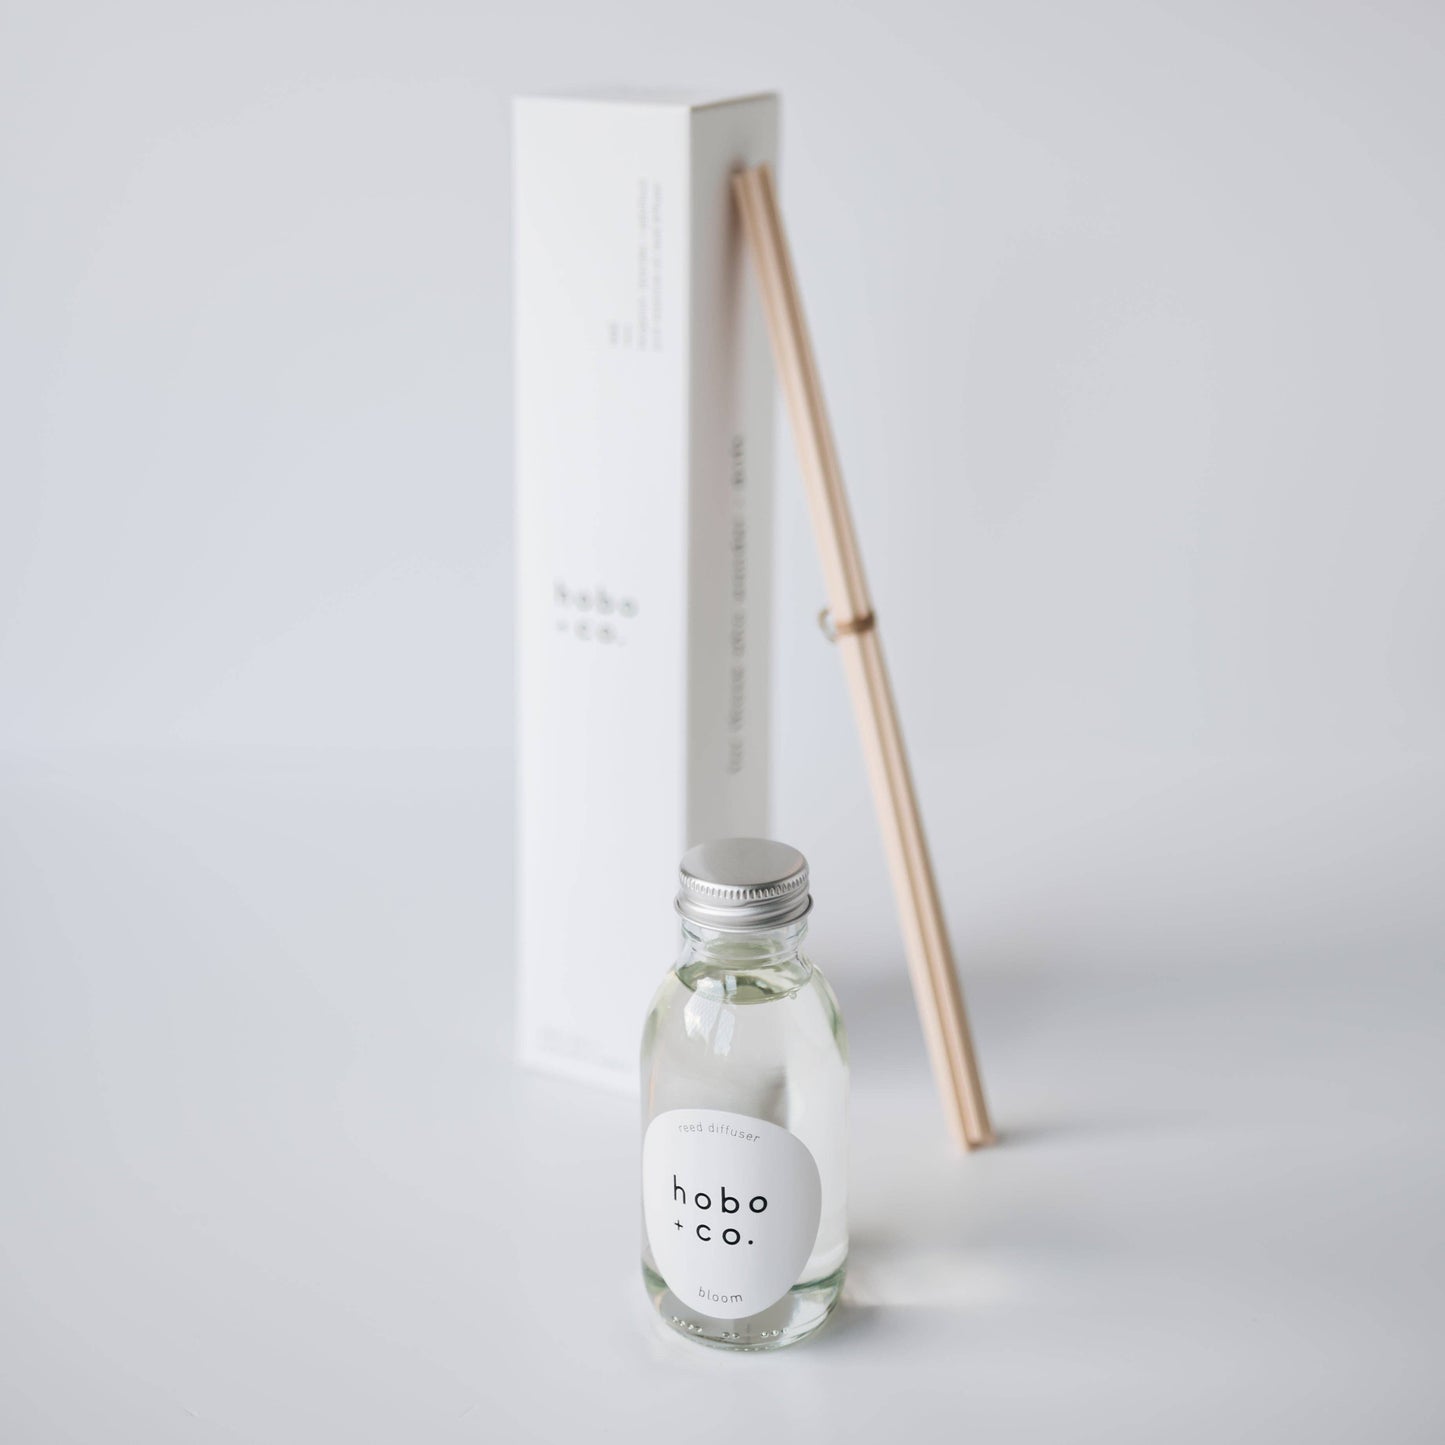 Hobo+Co Bloom Essential Oil Reed Diffuser at Joetie Home Fragrance. Luxury Handmade Apothecary Soy Candles